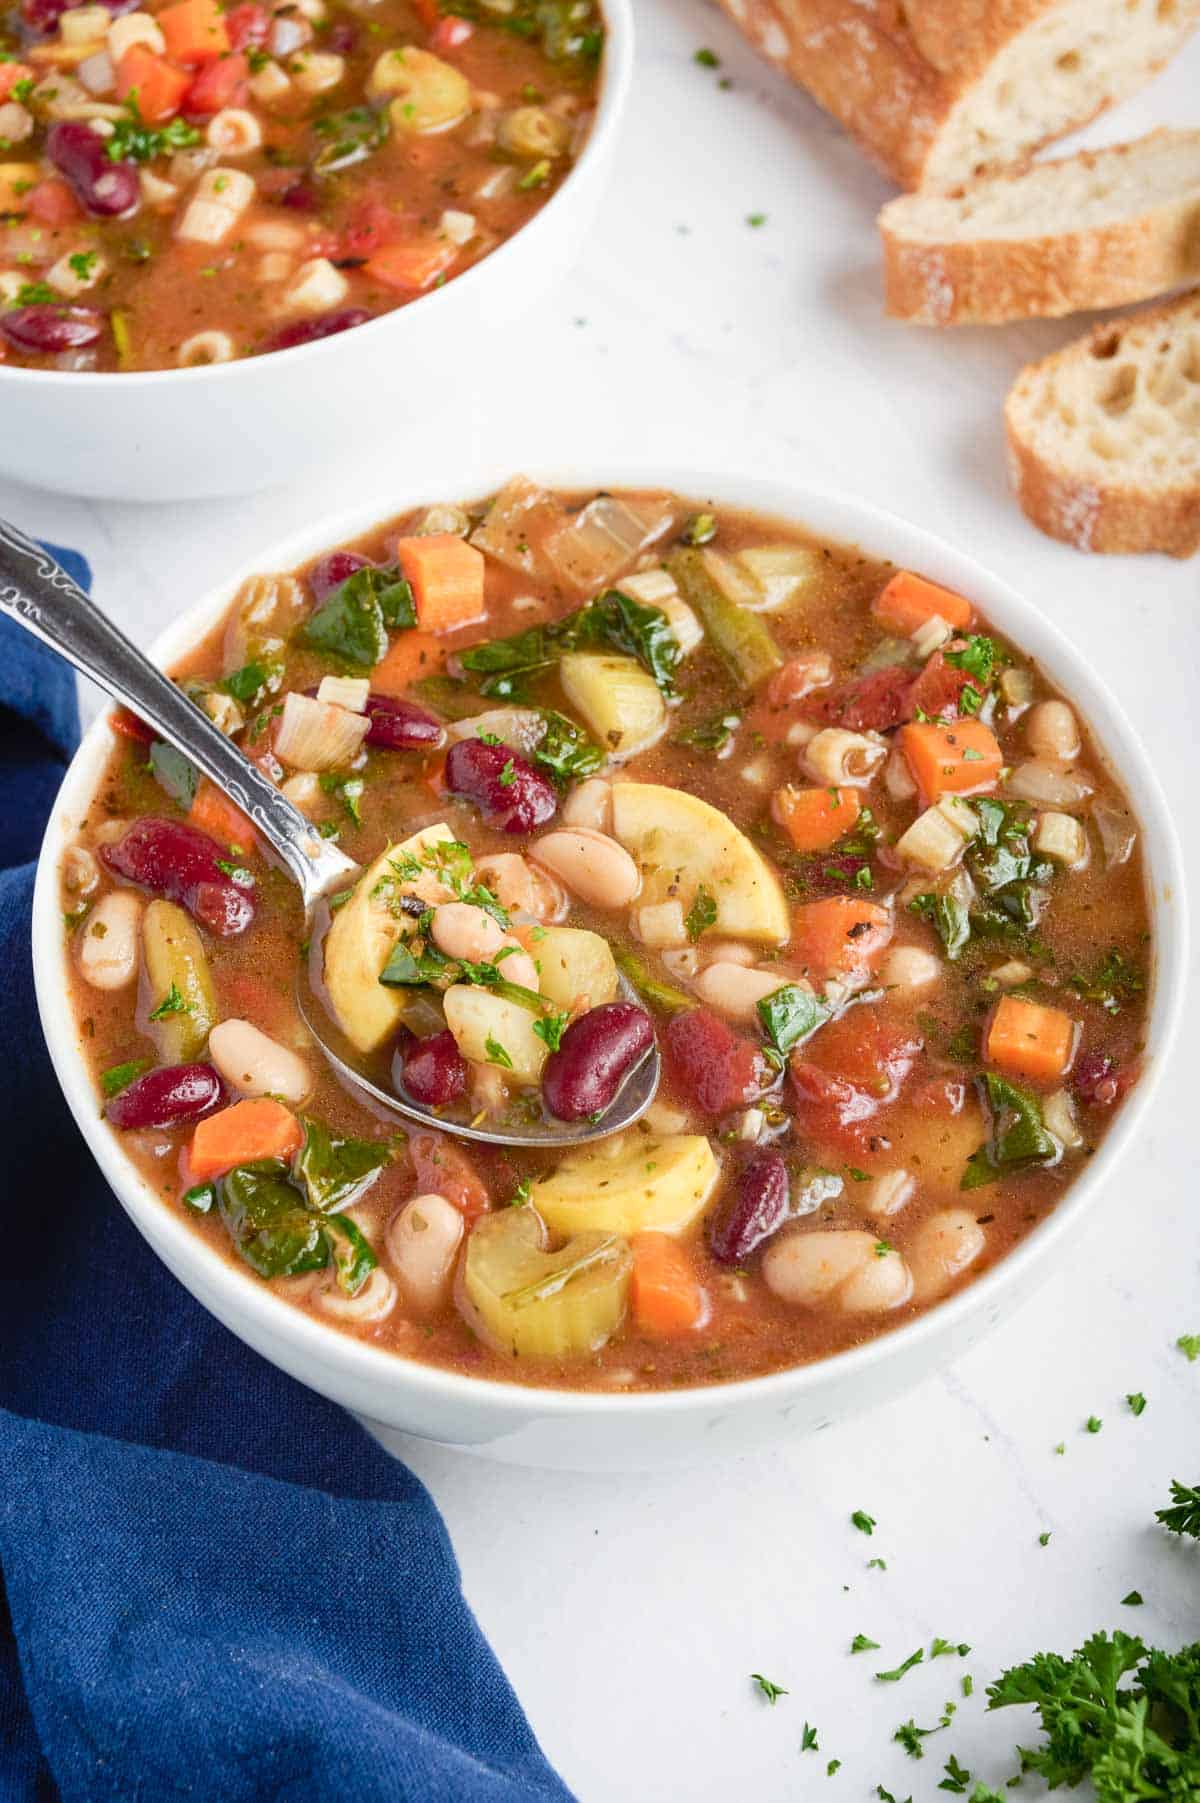 Serve up this healthy, minestrone soup on a cold, Fall day.